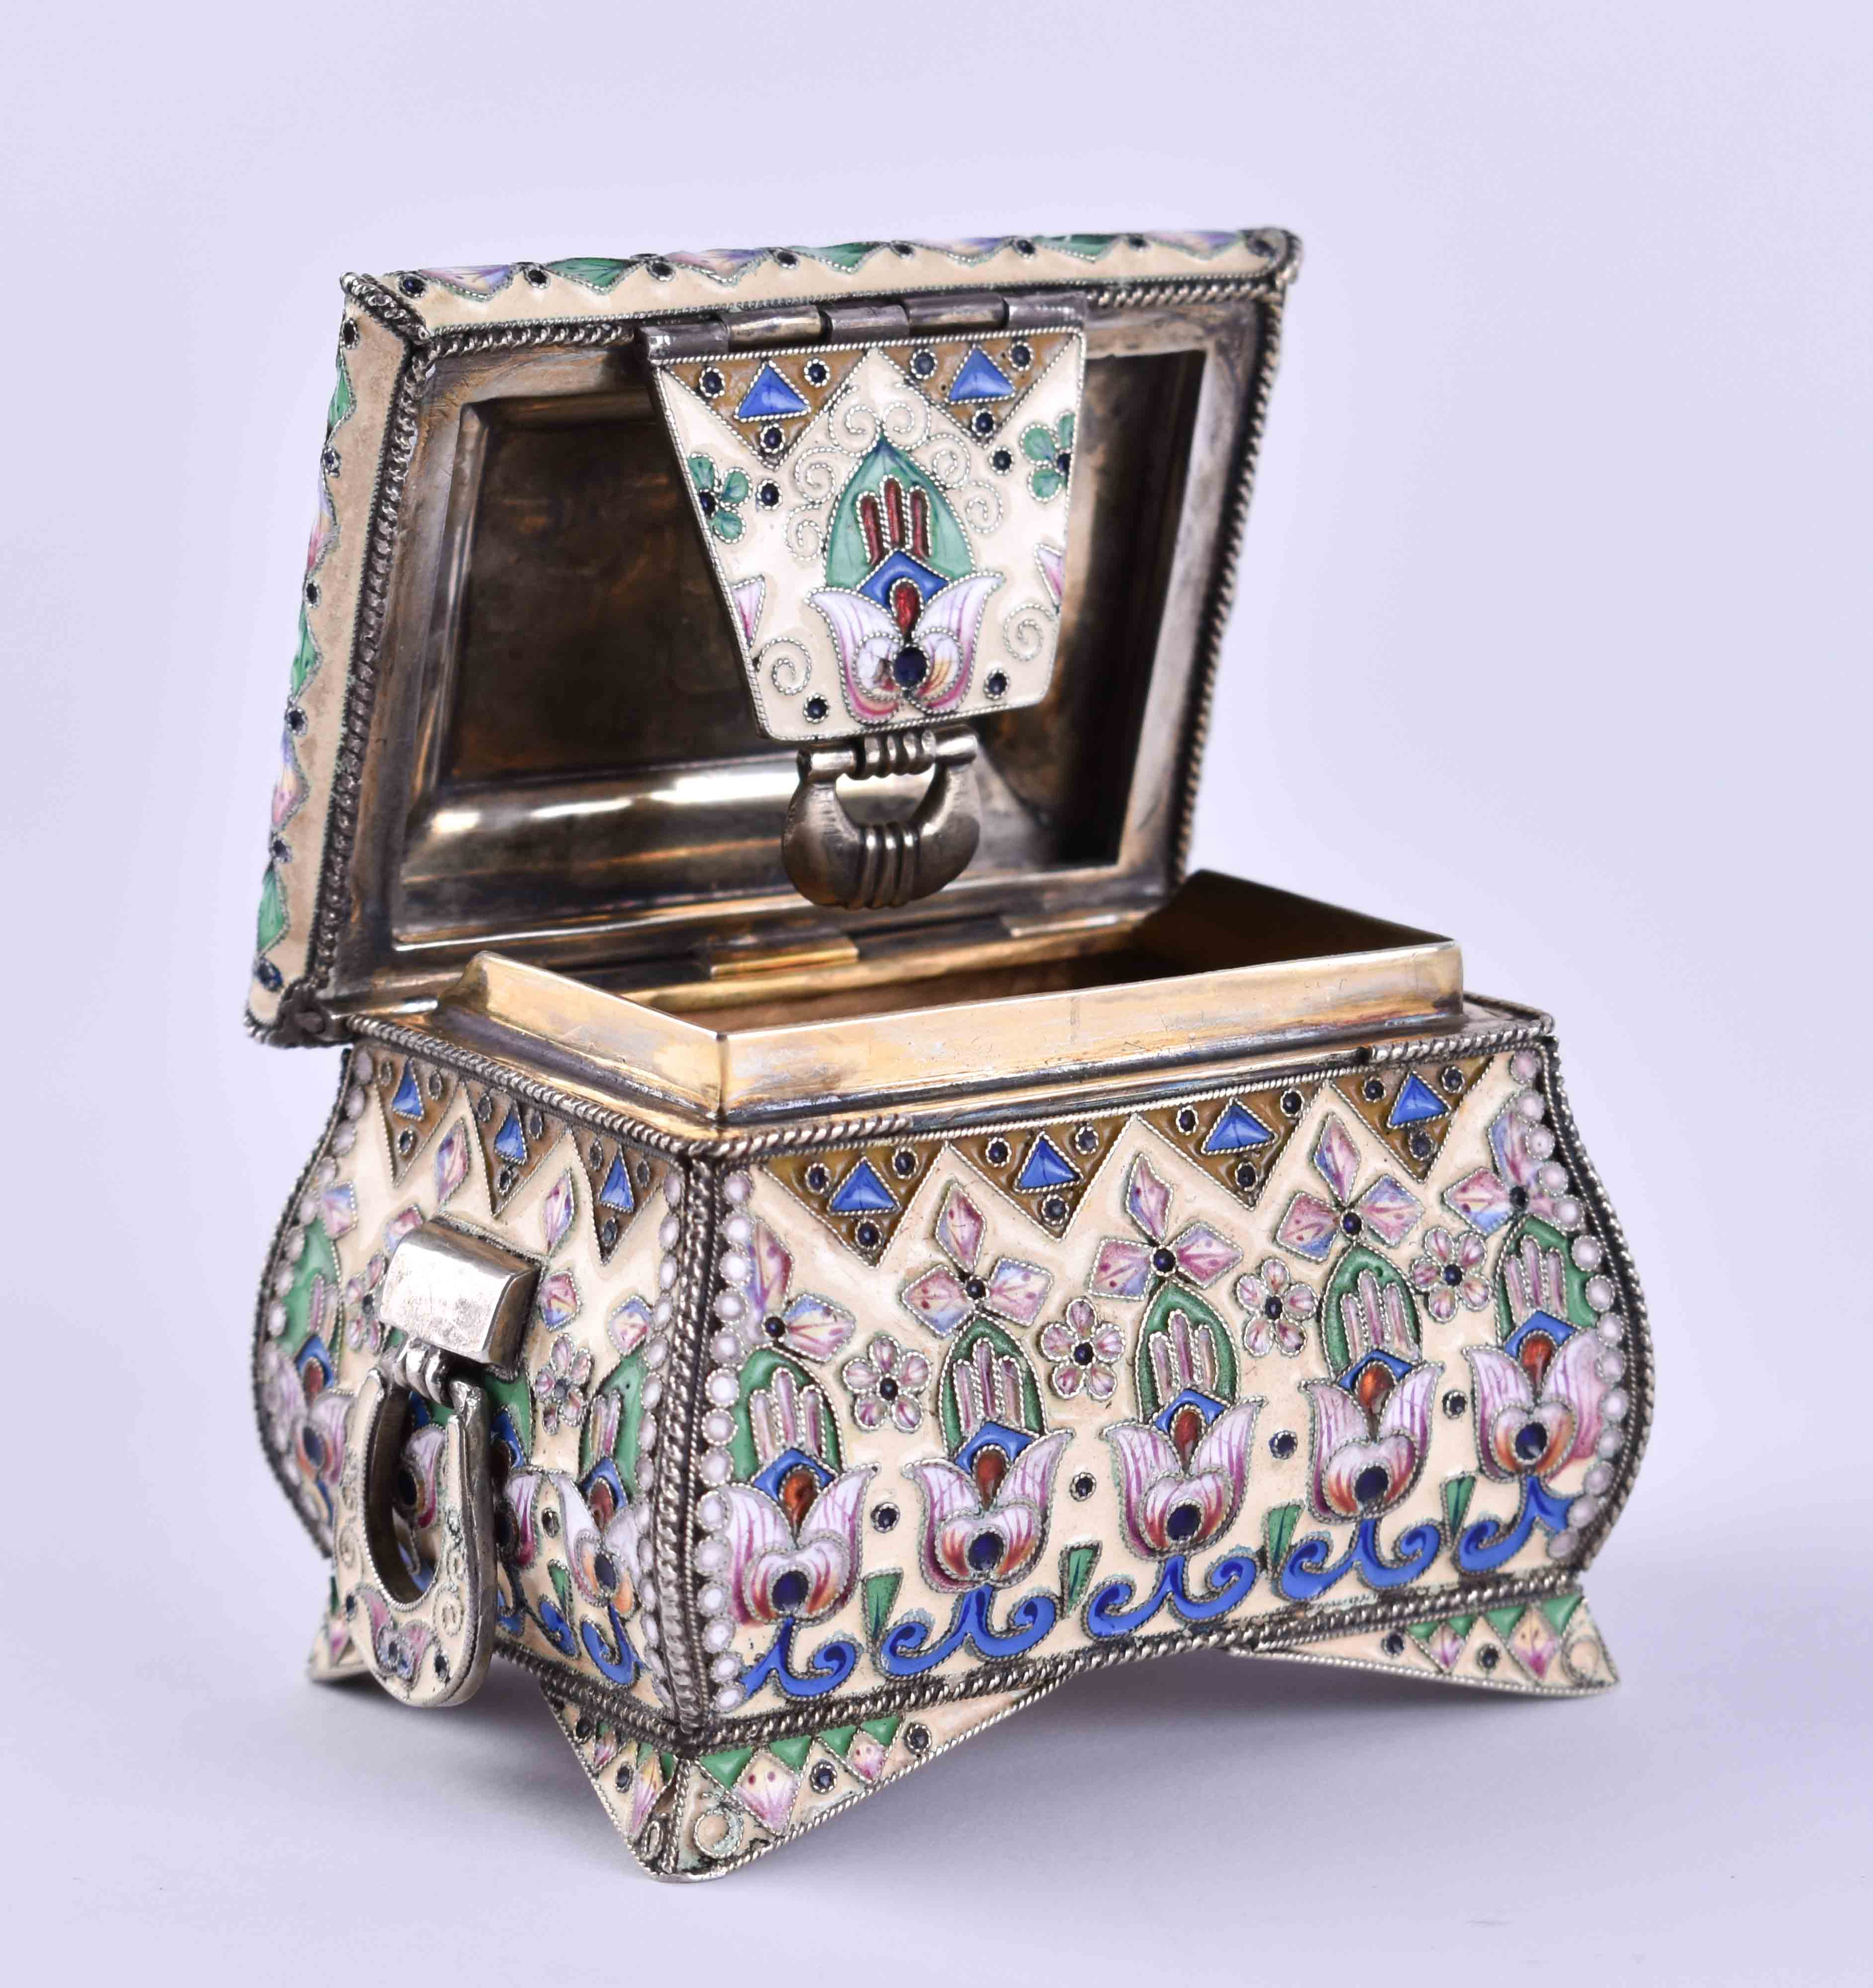 Cloisonne lidded box Russia - Image 5 of 7